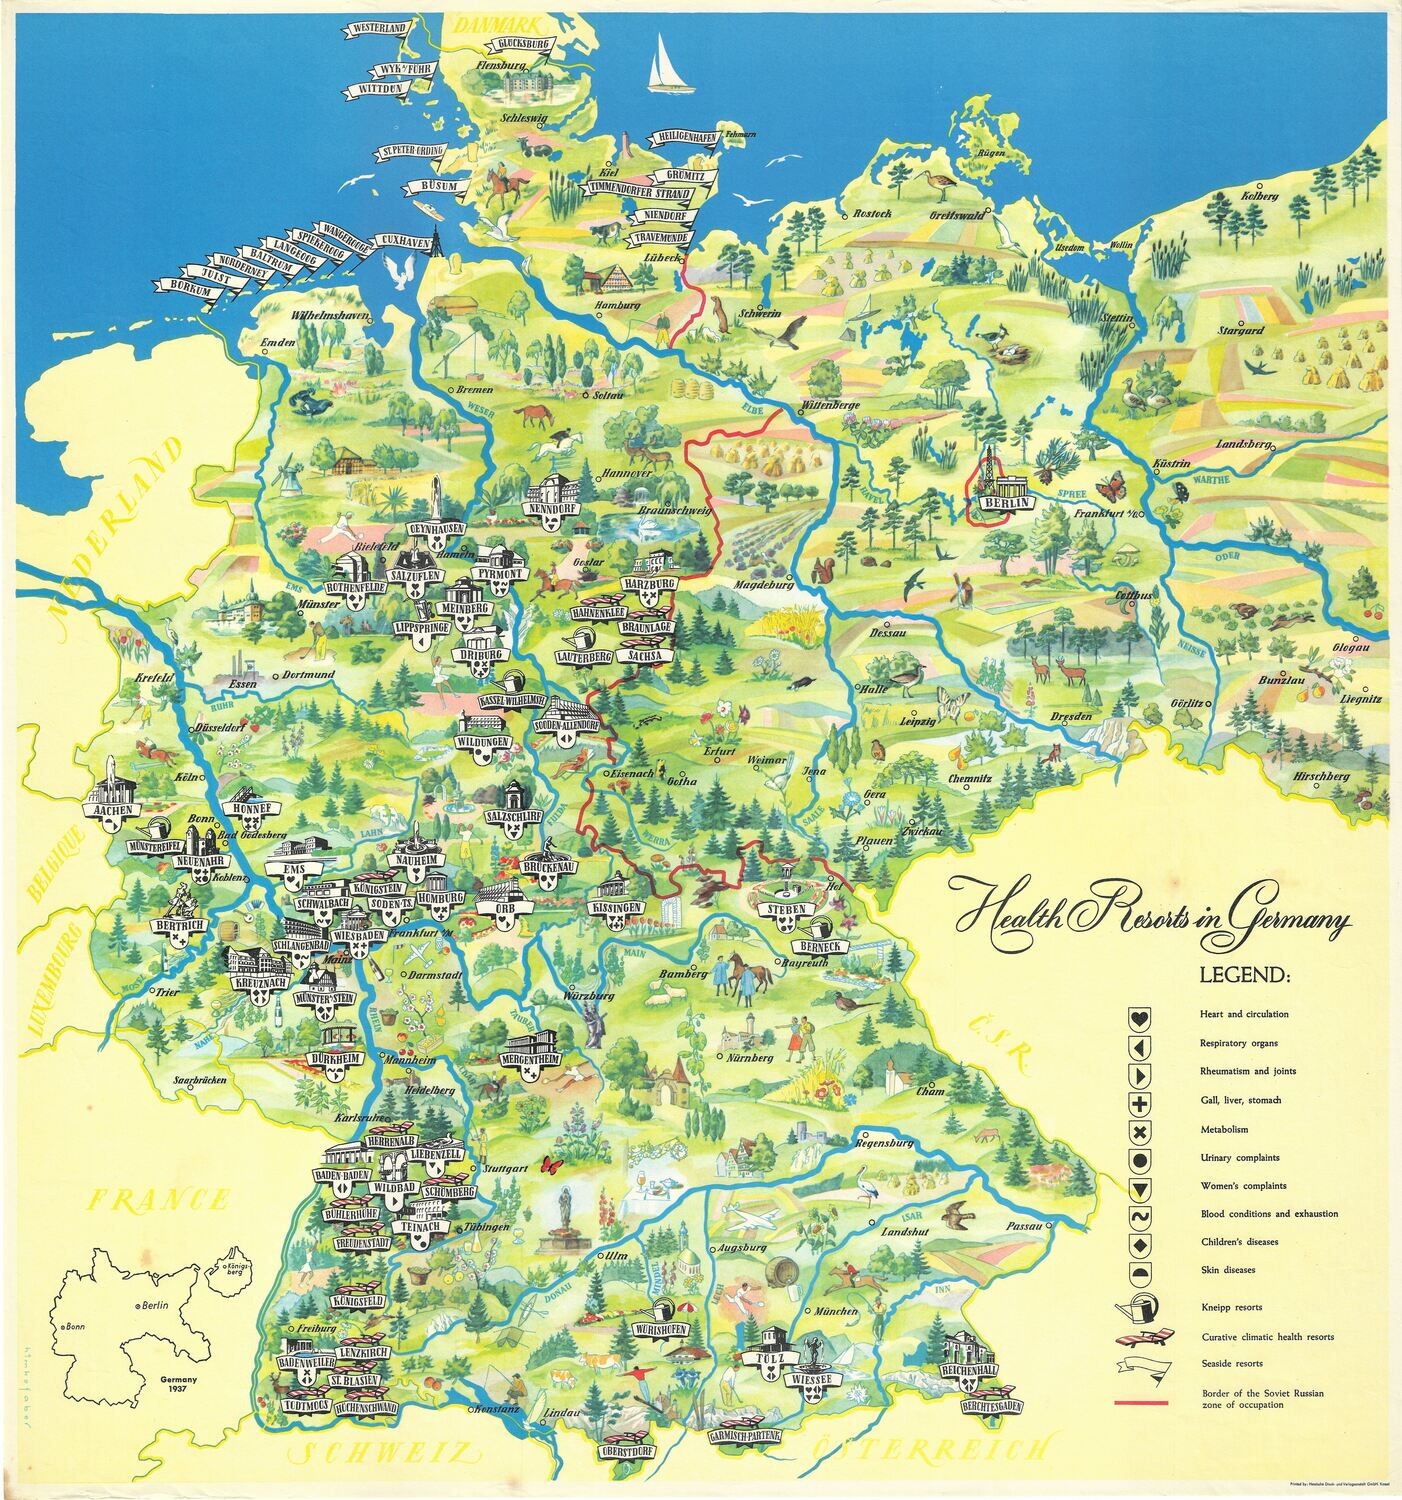 1937 Health Resorts of Germany by Hinkefaber in Chromolithography